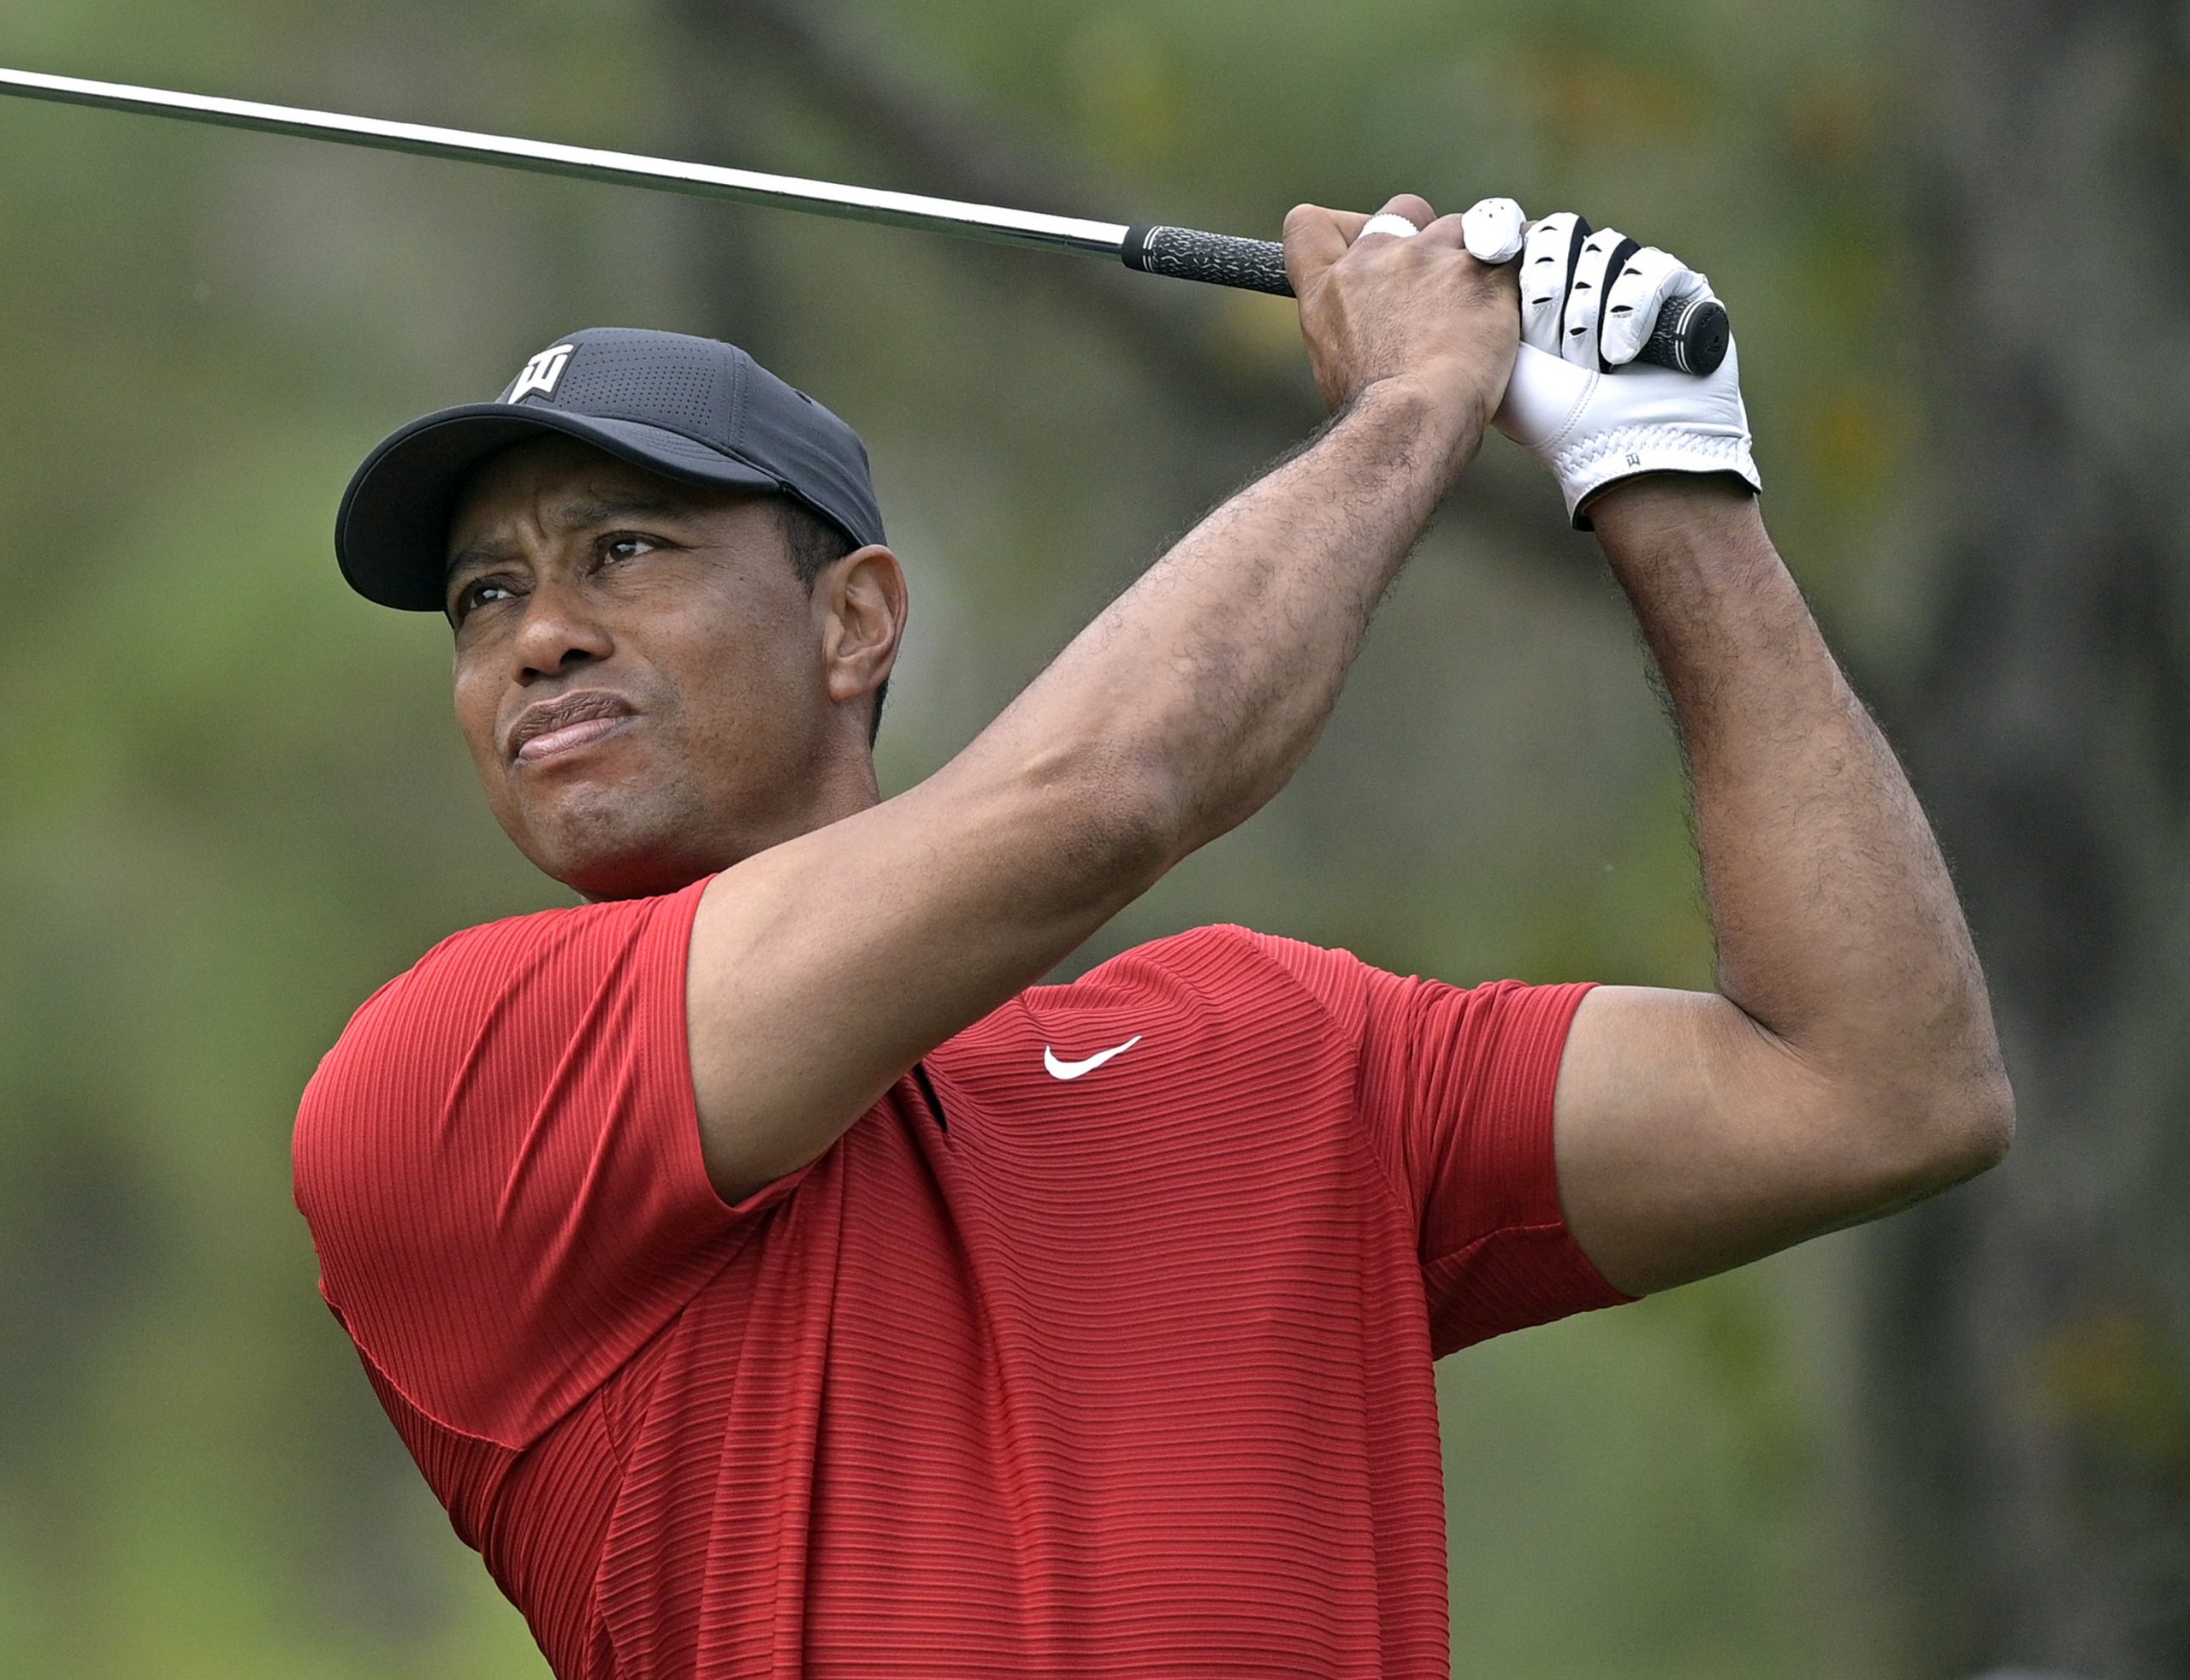 Tiger Woods Golf Grip: How Tiger Grips the Club and How You Can Hit Like Him